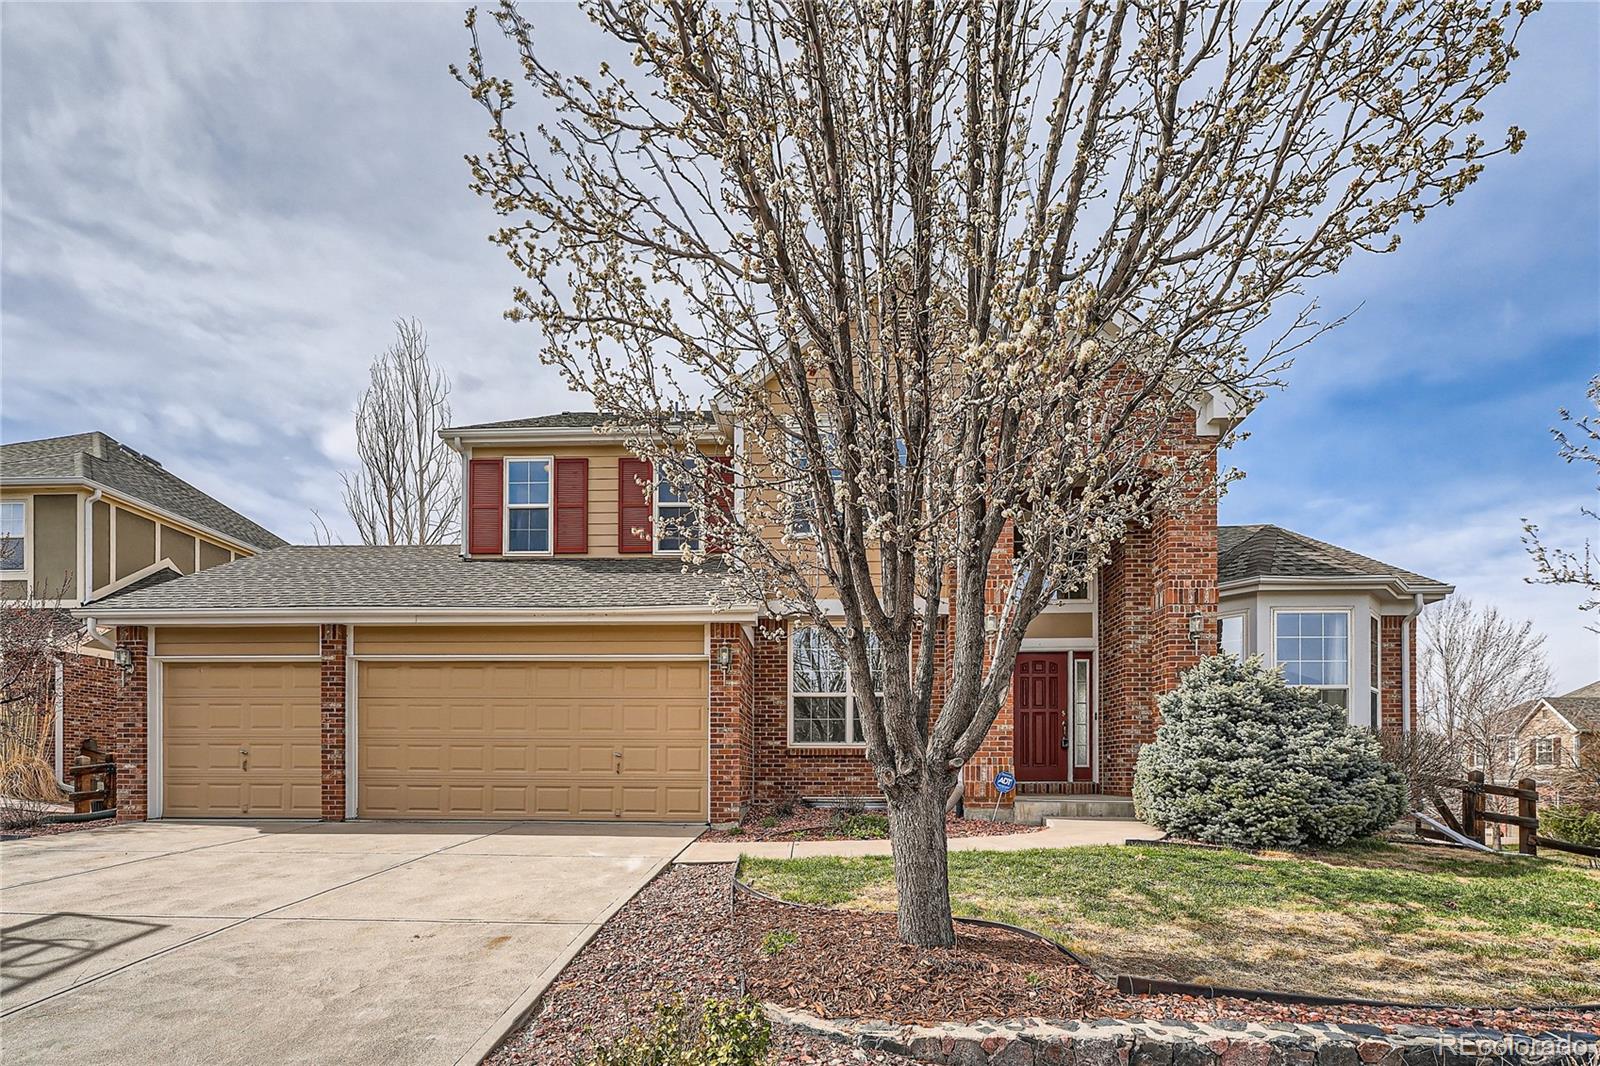 18241 e peakview place, aurora sold home. Closed on 2024-05-06 for $820,000.